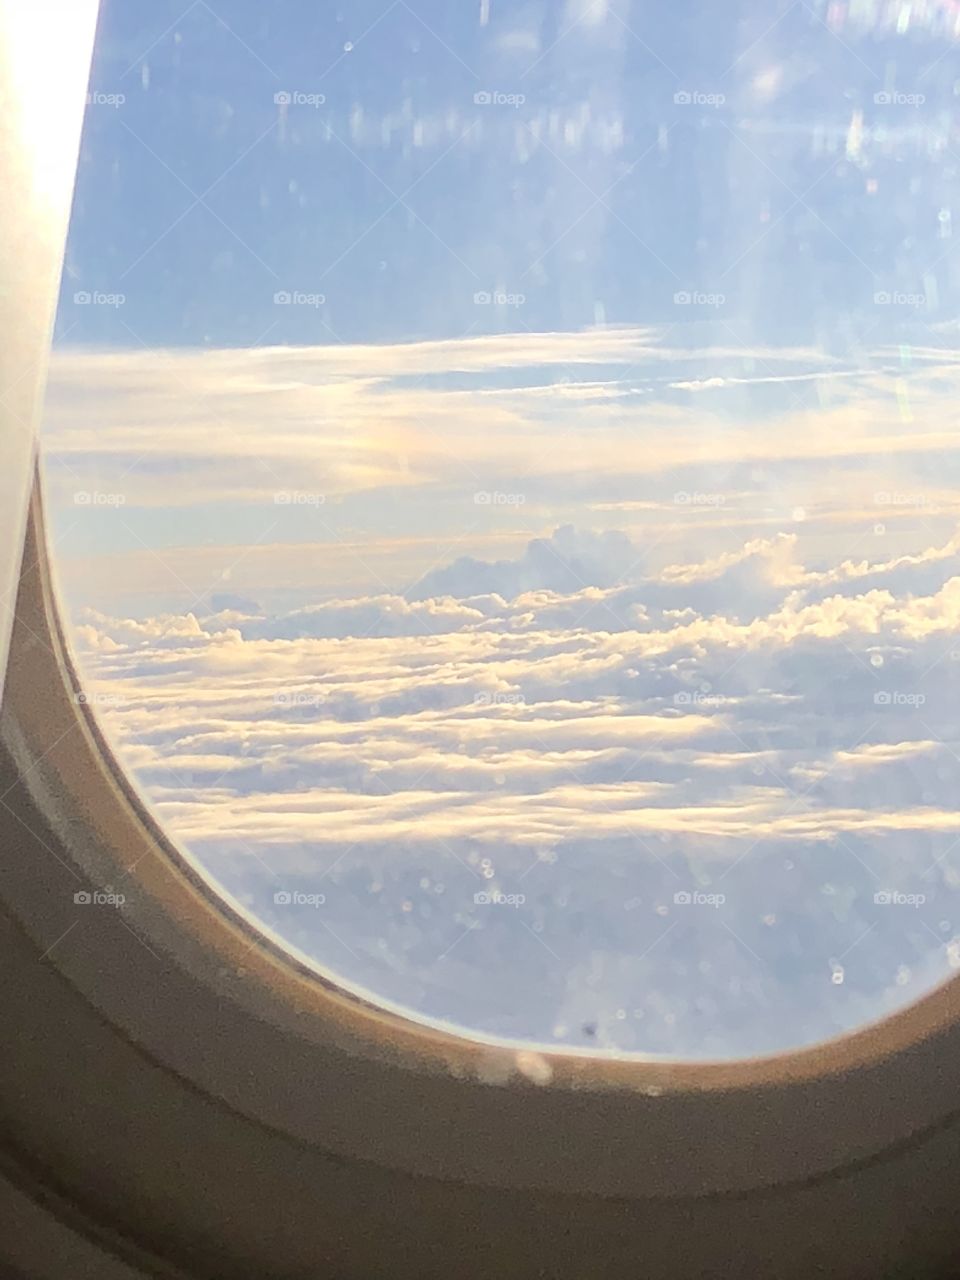 A picture of the morning clouds and sun taken from the window of an airplane! 